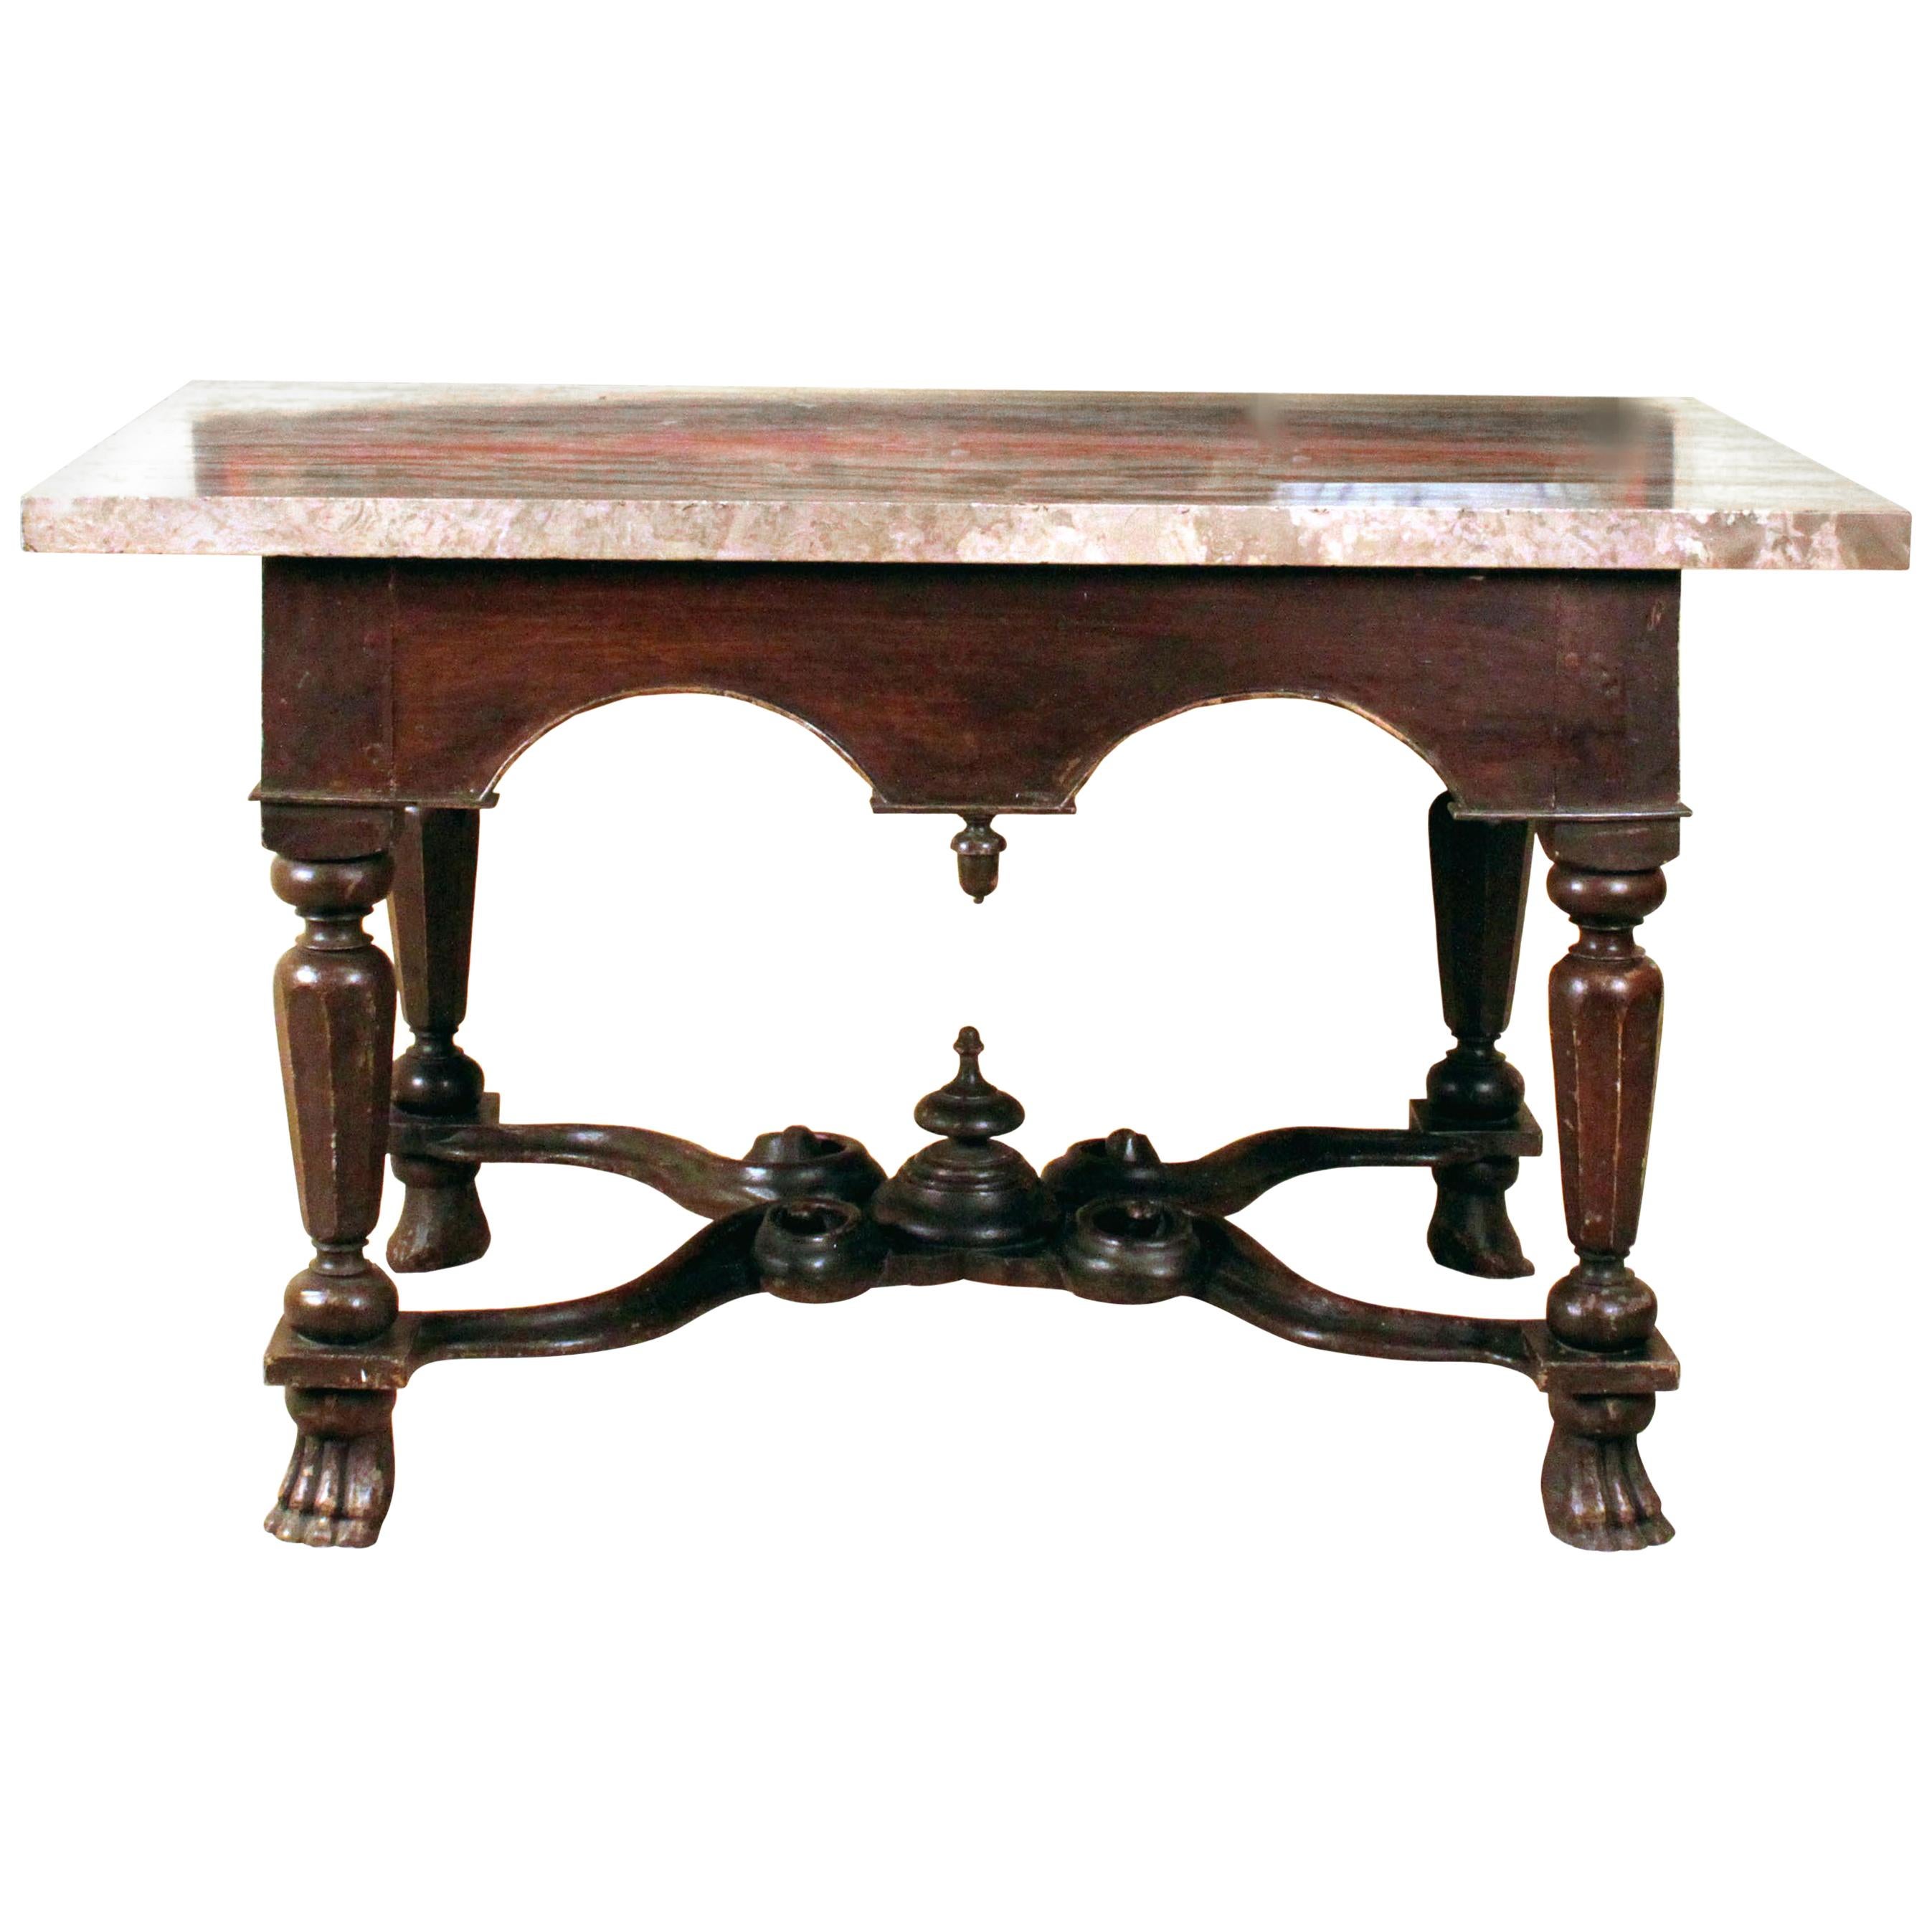 William & Mary X Stretcher Antique Pier Table For Sale